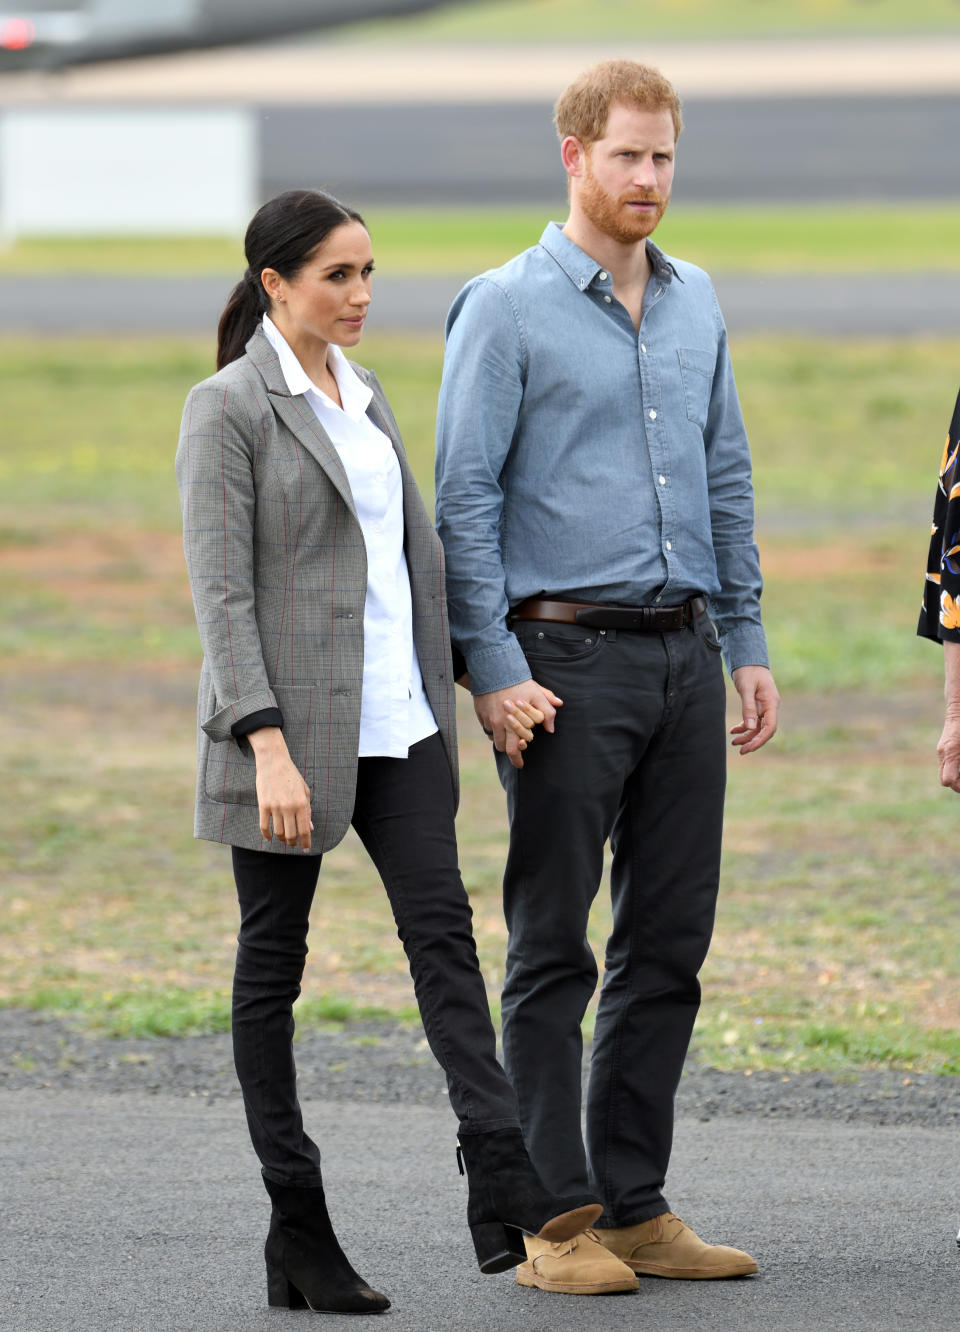 DUBBO, AUSTRALIA - OCTOBER 17:  Prince Harry, Duke of Sussex and Meghan, Duchess of Sussex meet local community members as they attend the naming dedication and unveiling of a new aircraft in the Royal Flying Doctor Service (RFDS) fleet at Dubbo Airport on October 17, 2018 in Dubbo, Australia. The Duke and Duchess of Sussex are on their official 16-day Autumn tour visiting cities in Australia, Fiji, Tonga and New Zealand.  (Photo by Karwai Tang/WireImage)